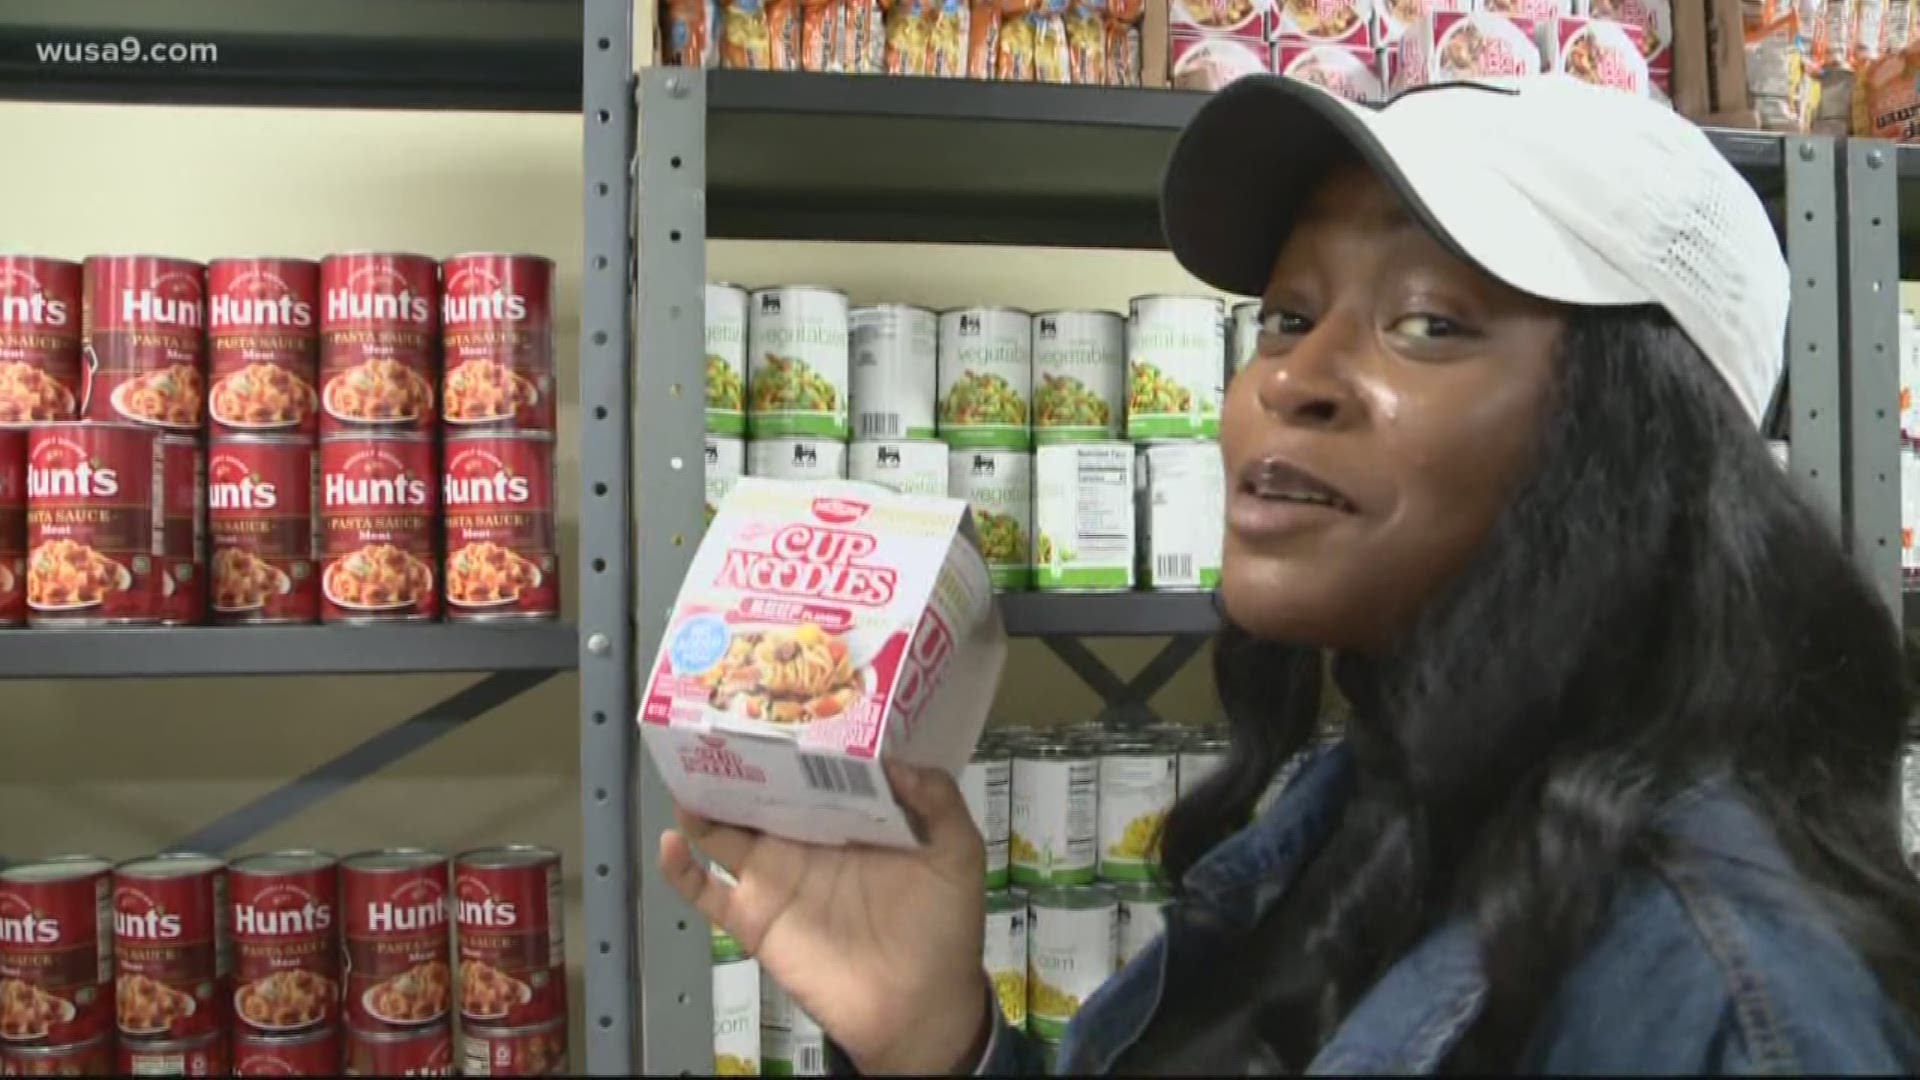 Tonight--we're in the 3-0-1 at Bowie State University where a new food pantry is helping to alleviate some stress on our students.